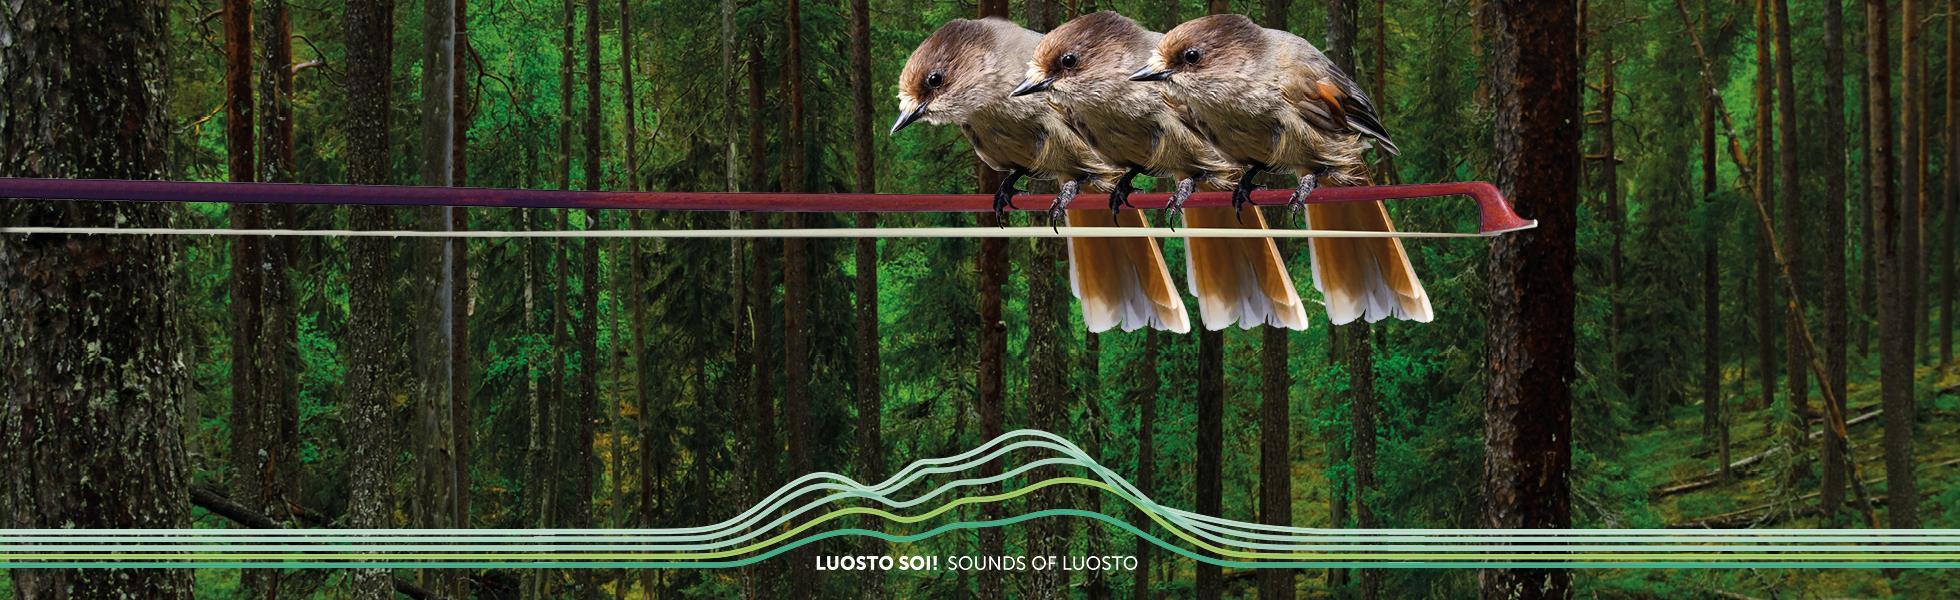 Next summer’s Sounds of Luosto festival expands and will host two orchestras!